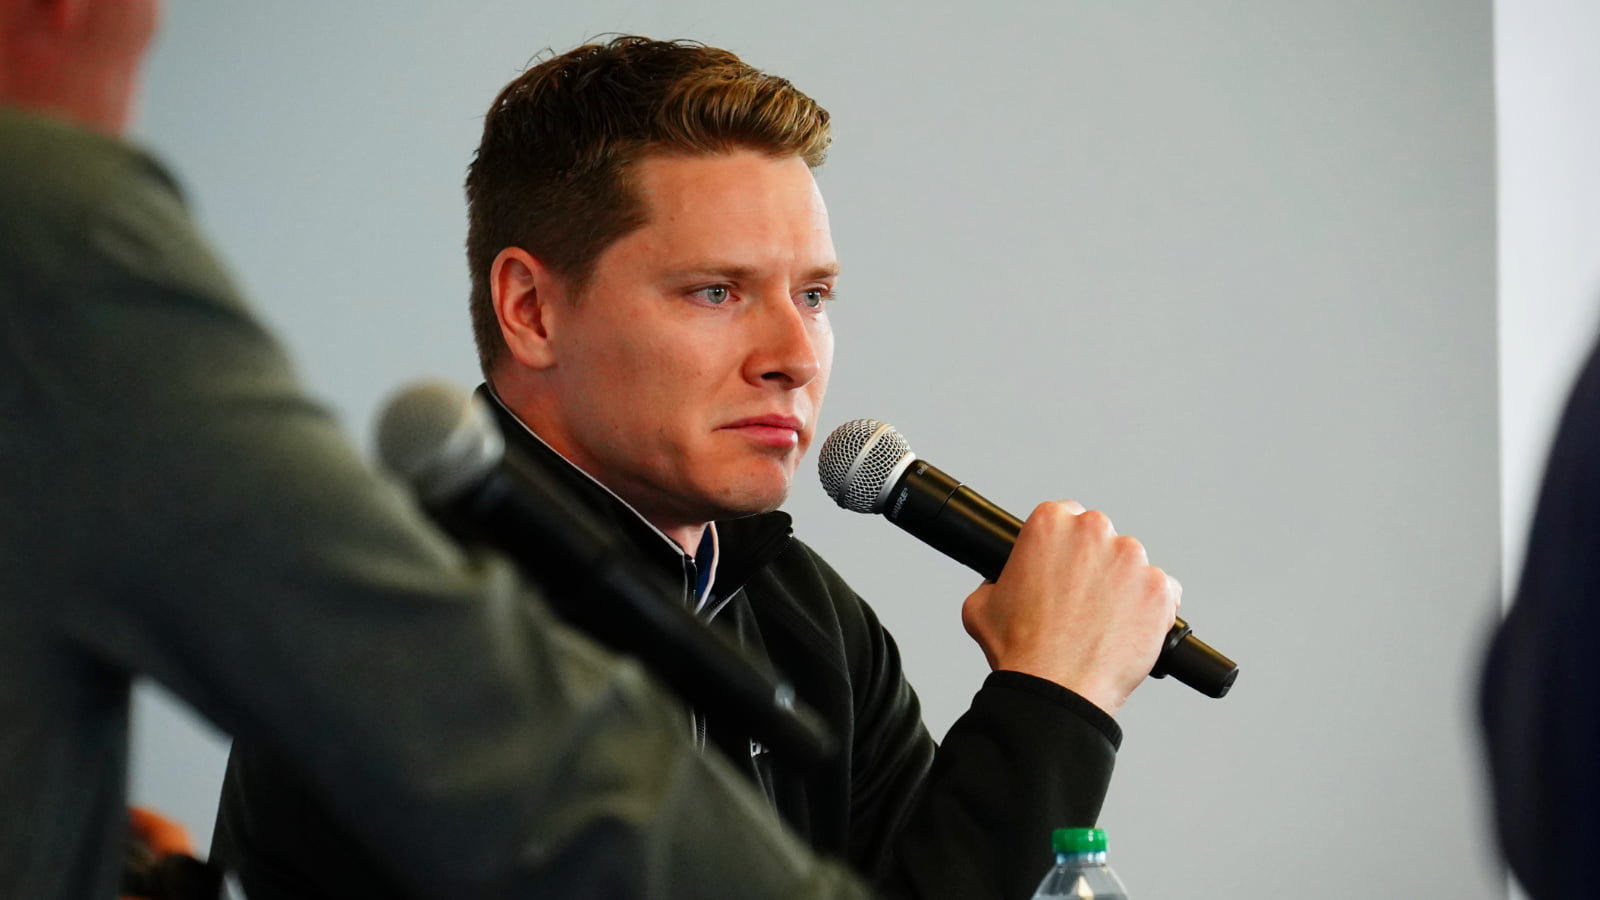 Newgarden believed IndyCar changed boost rules, apologetic over breach